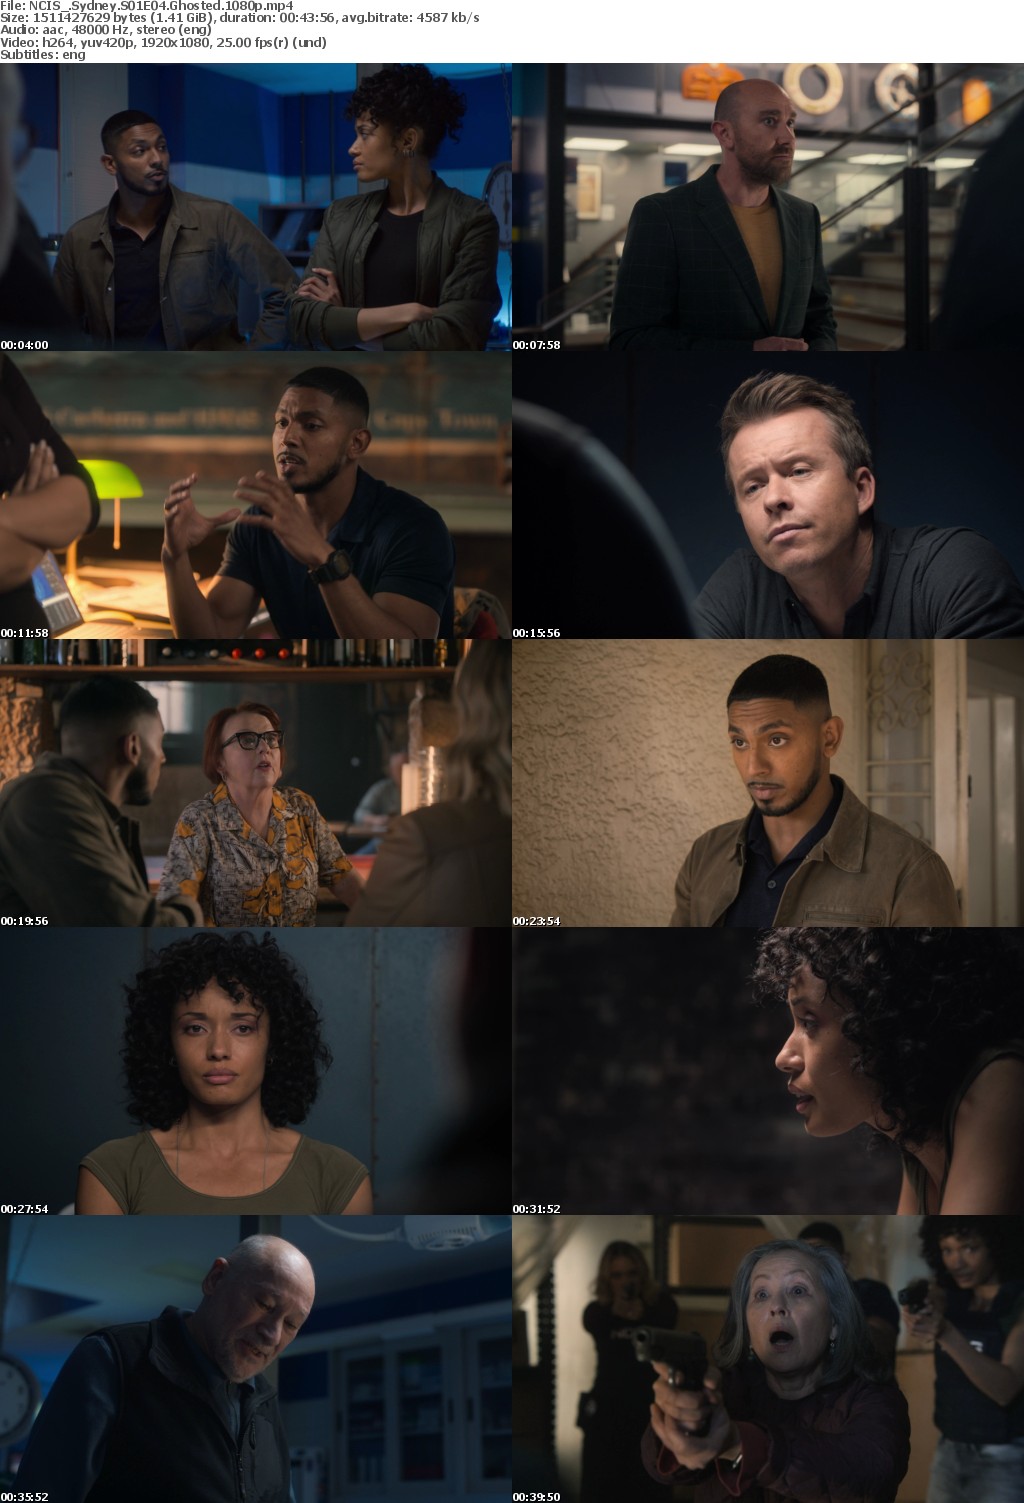 NCIS Sydney S01E04 Ghosted 1080p